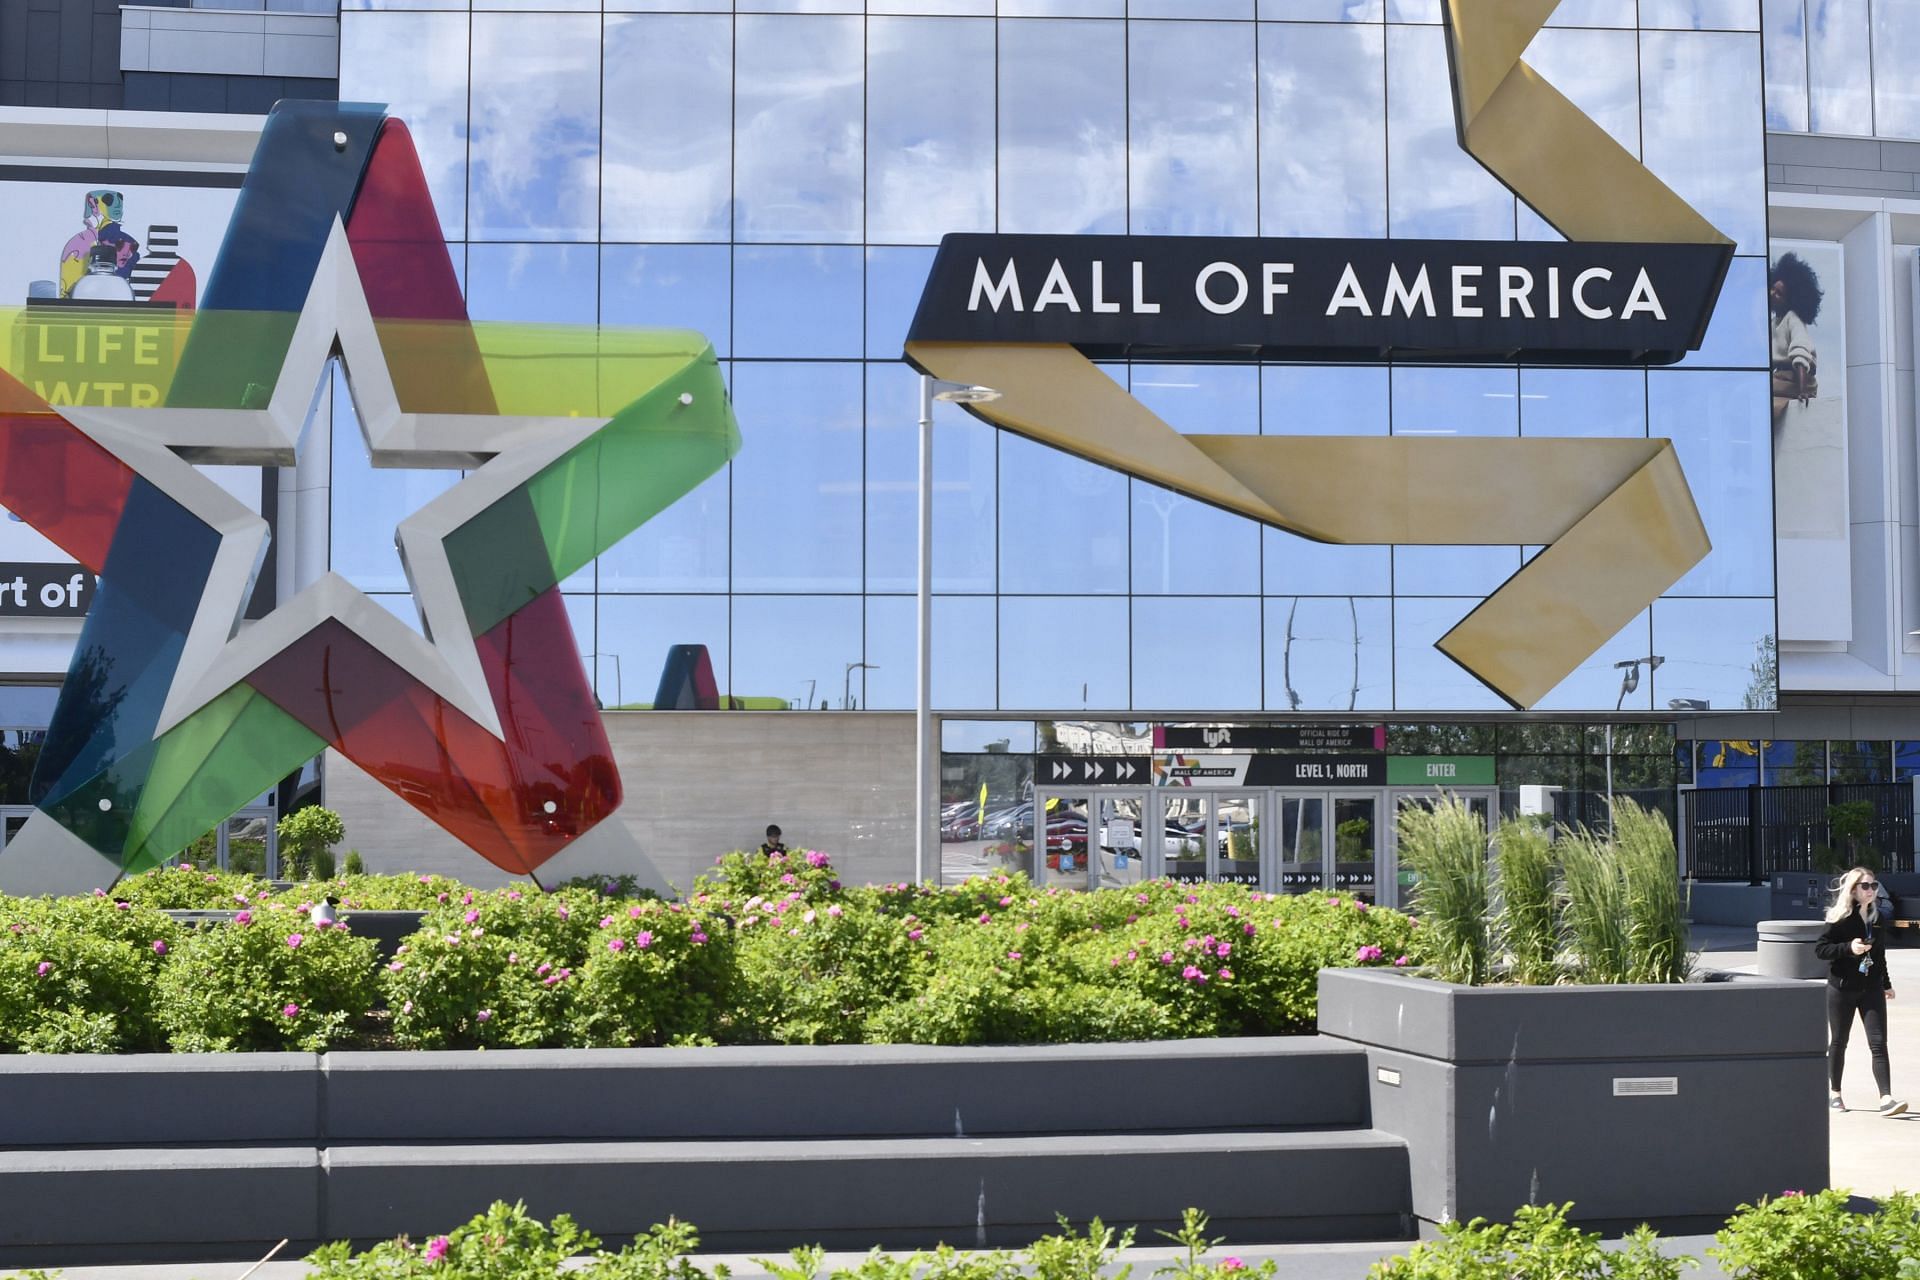 Details about Mall of America lockdown amidst alleged shooting causes a stir online explored as one killed in the shooting. (Image via Mall of America)